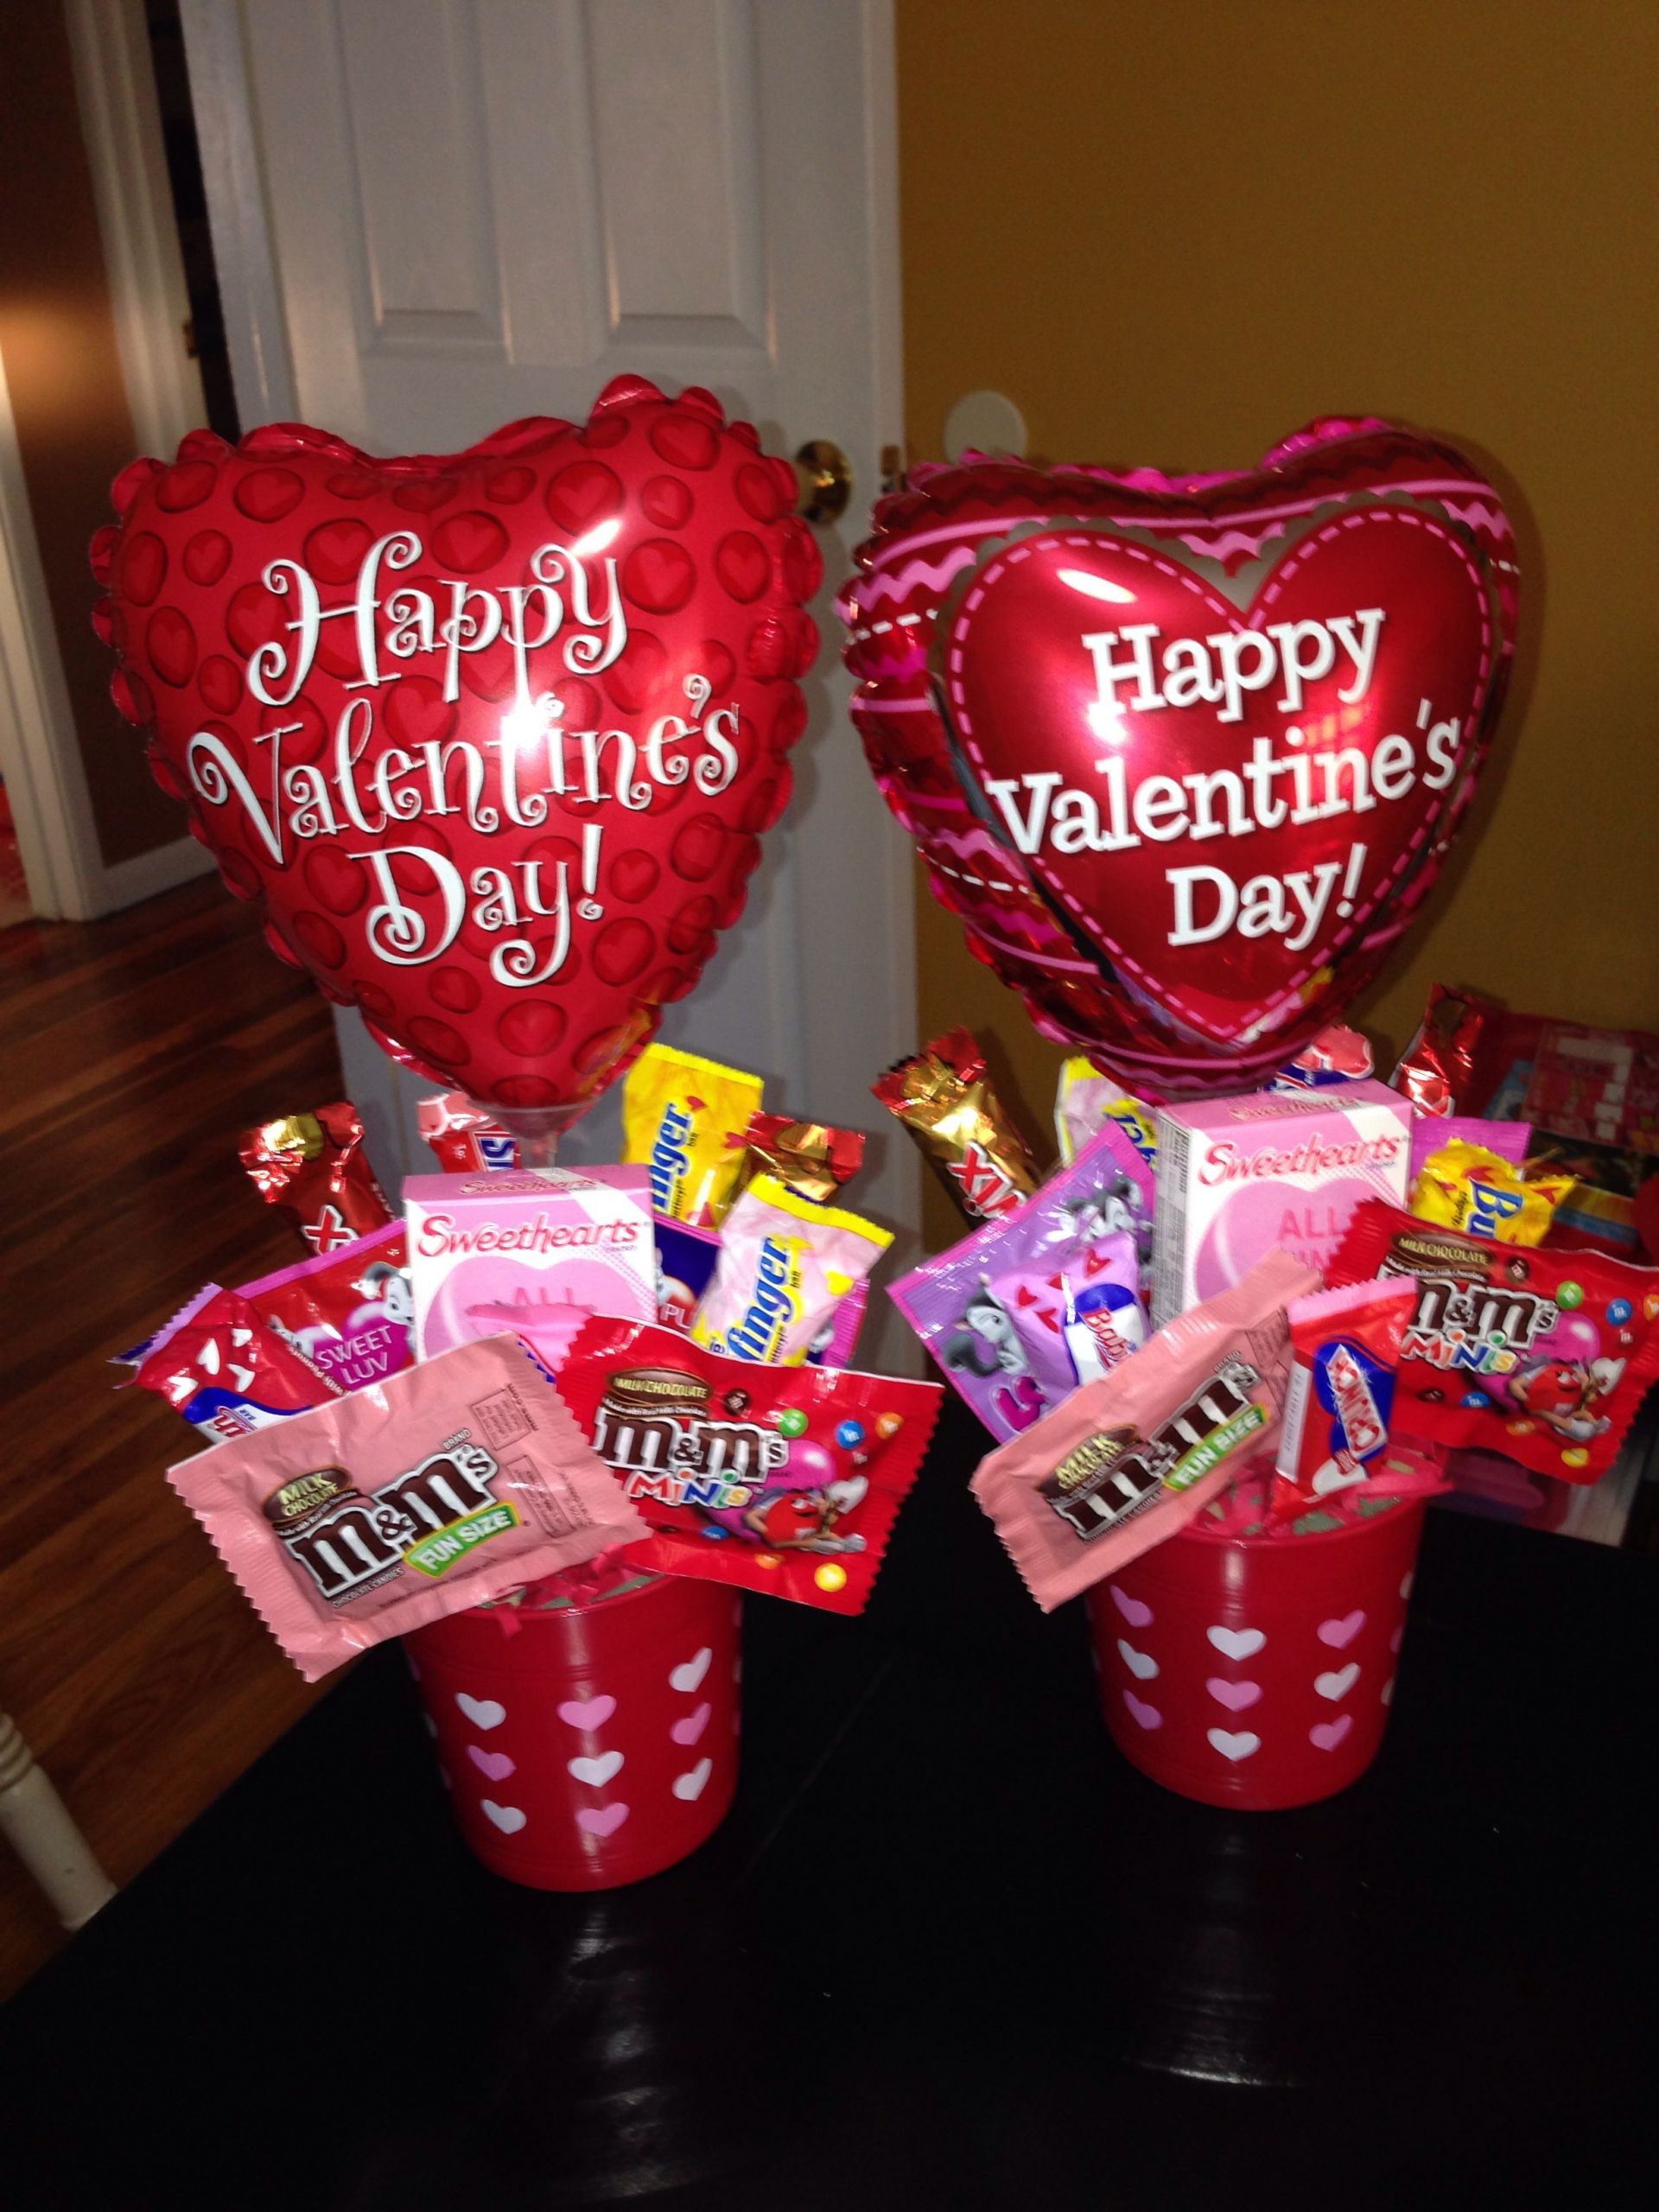 Valentines Candy Gift Ideas
 Pin on Candy bouquets